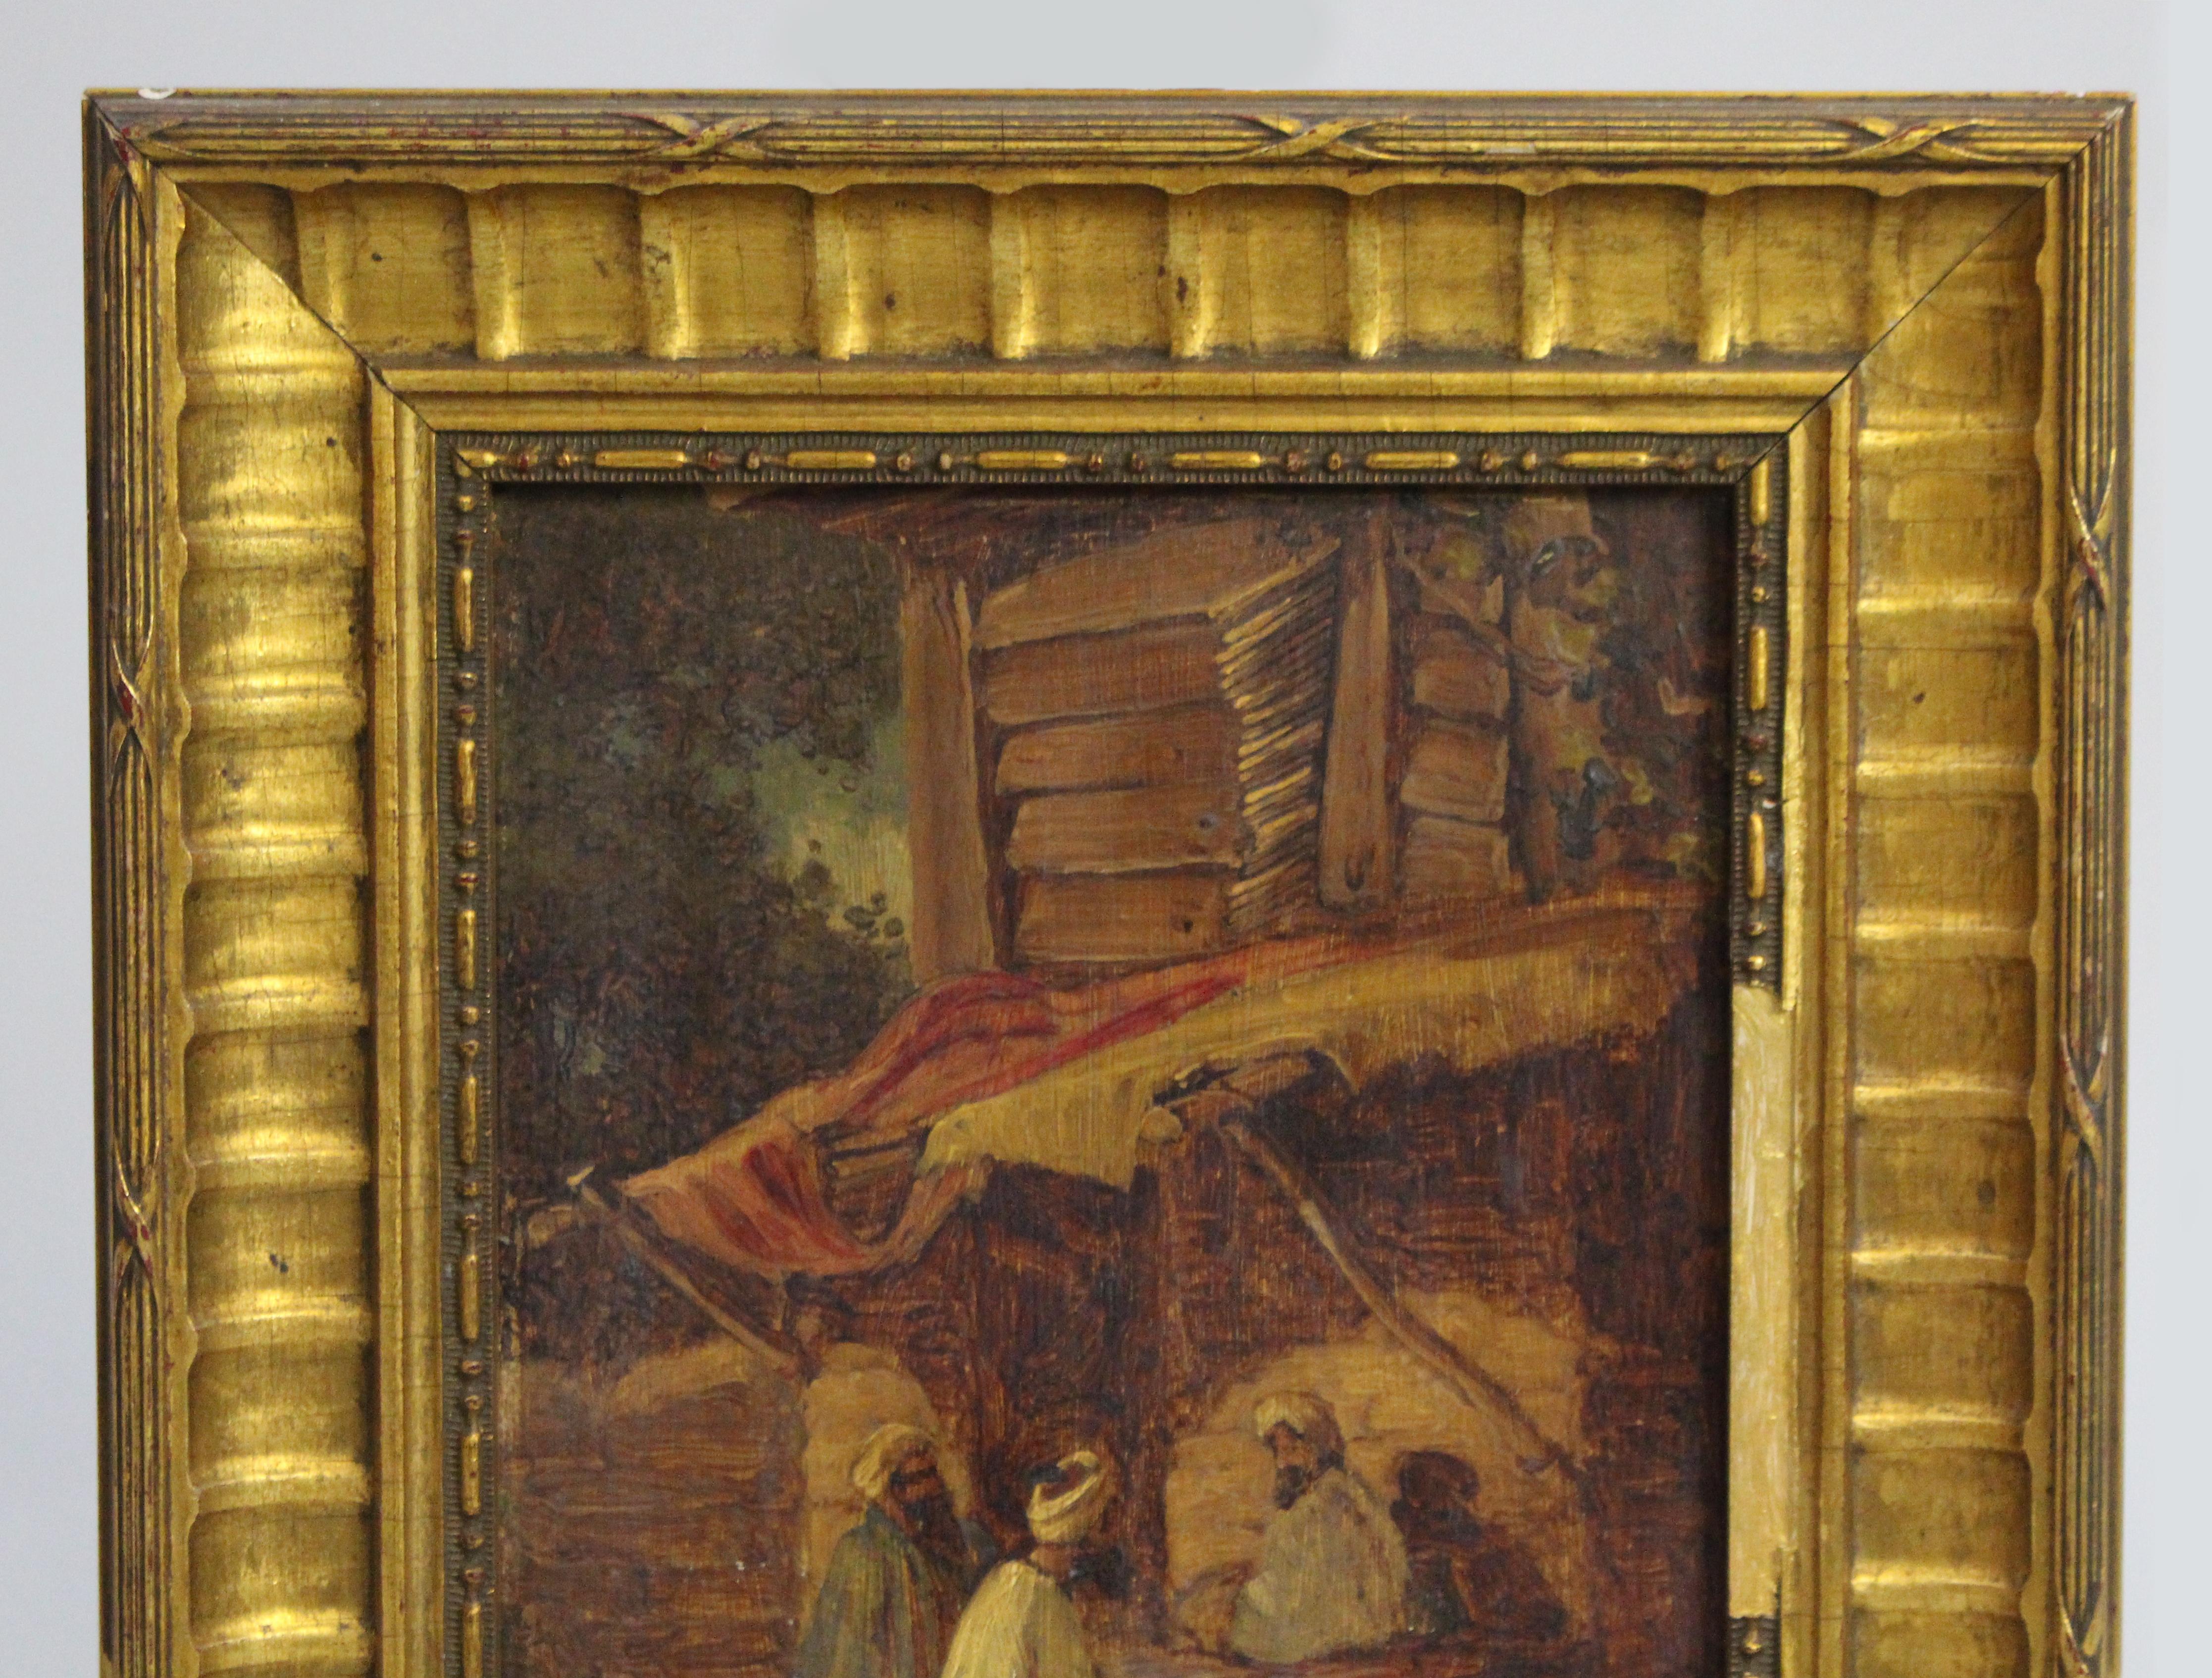 19th Century Arabian Market Scene Sketch Oil on Board In Good Condition For Sale In Worcester, Worcestershire